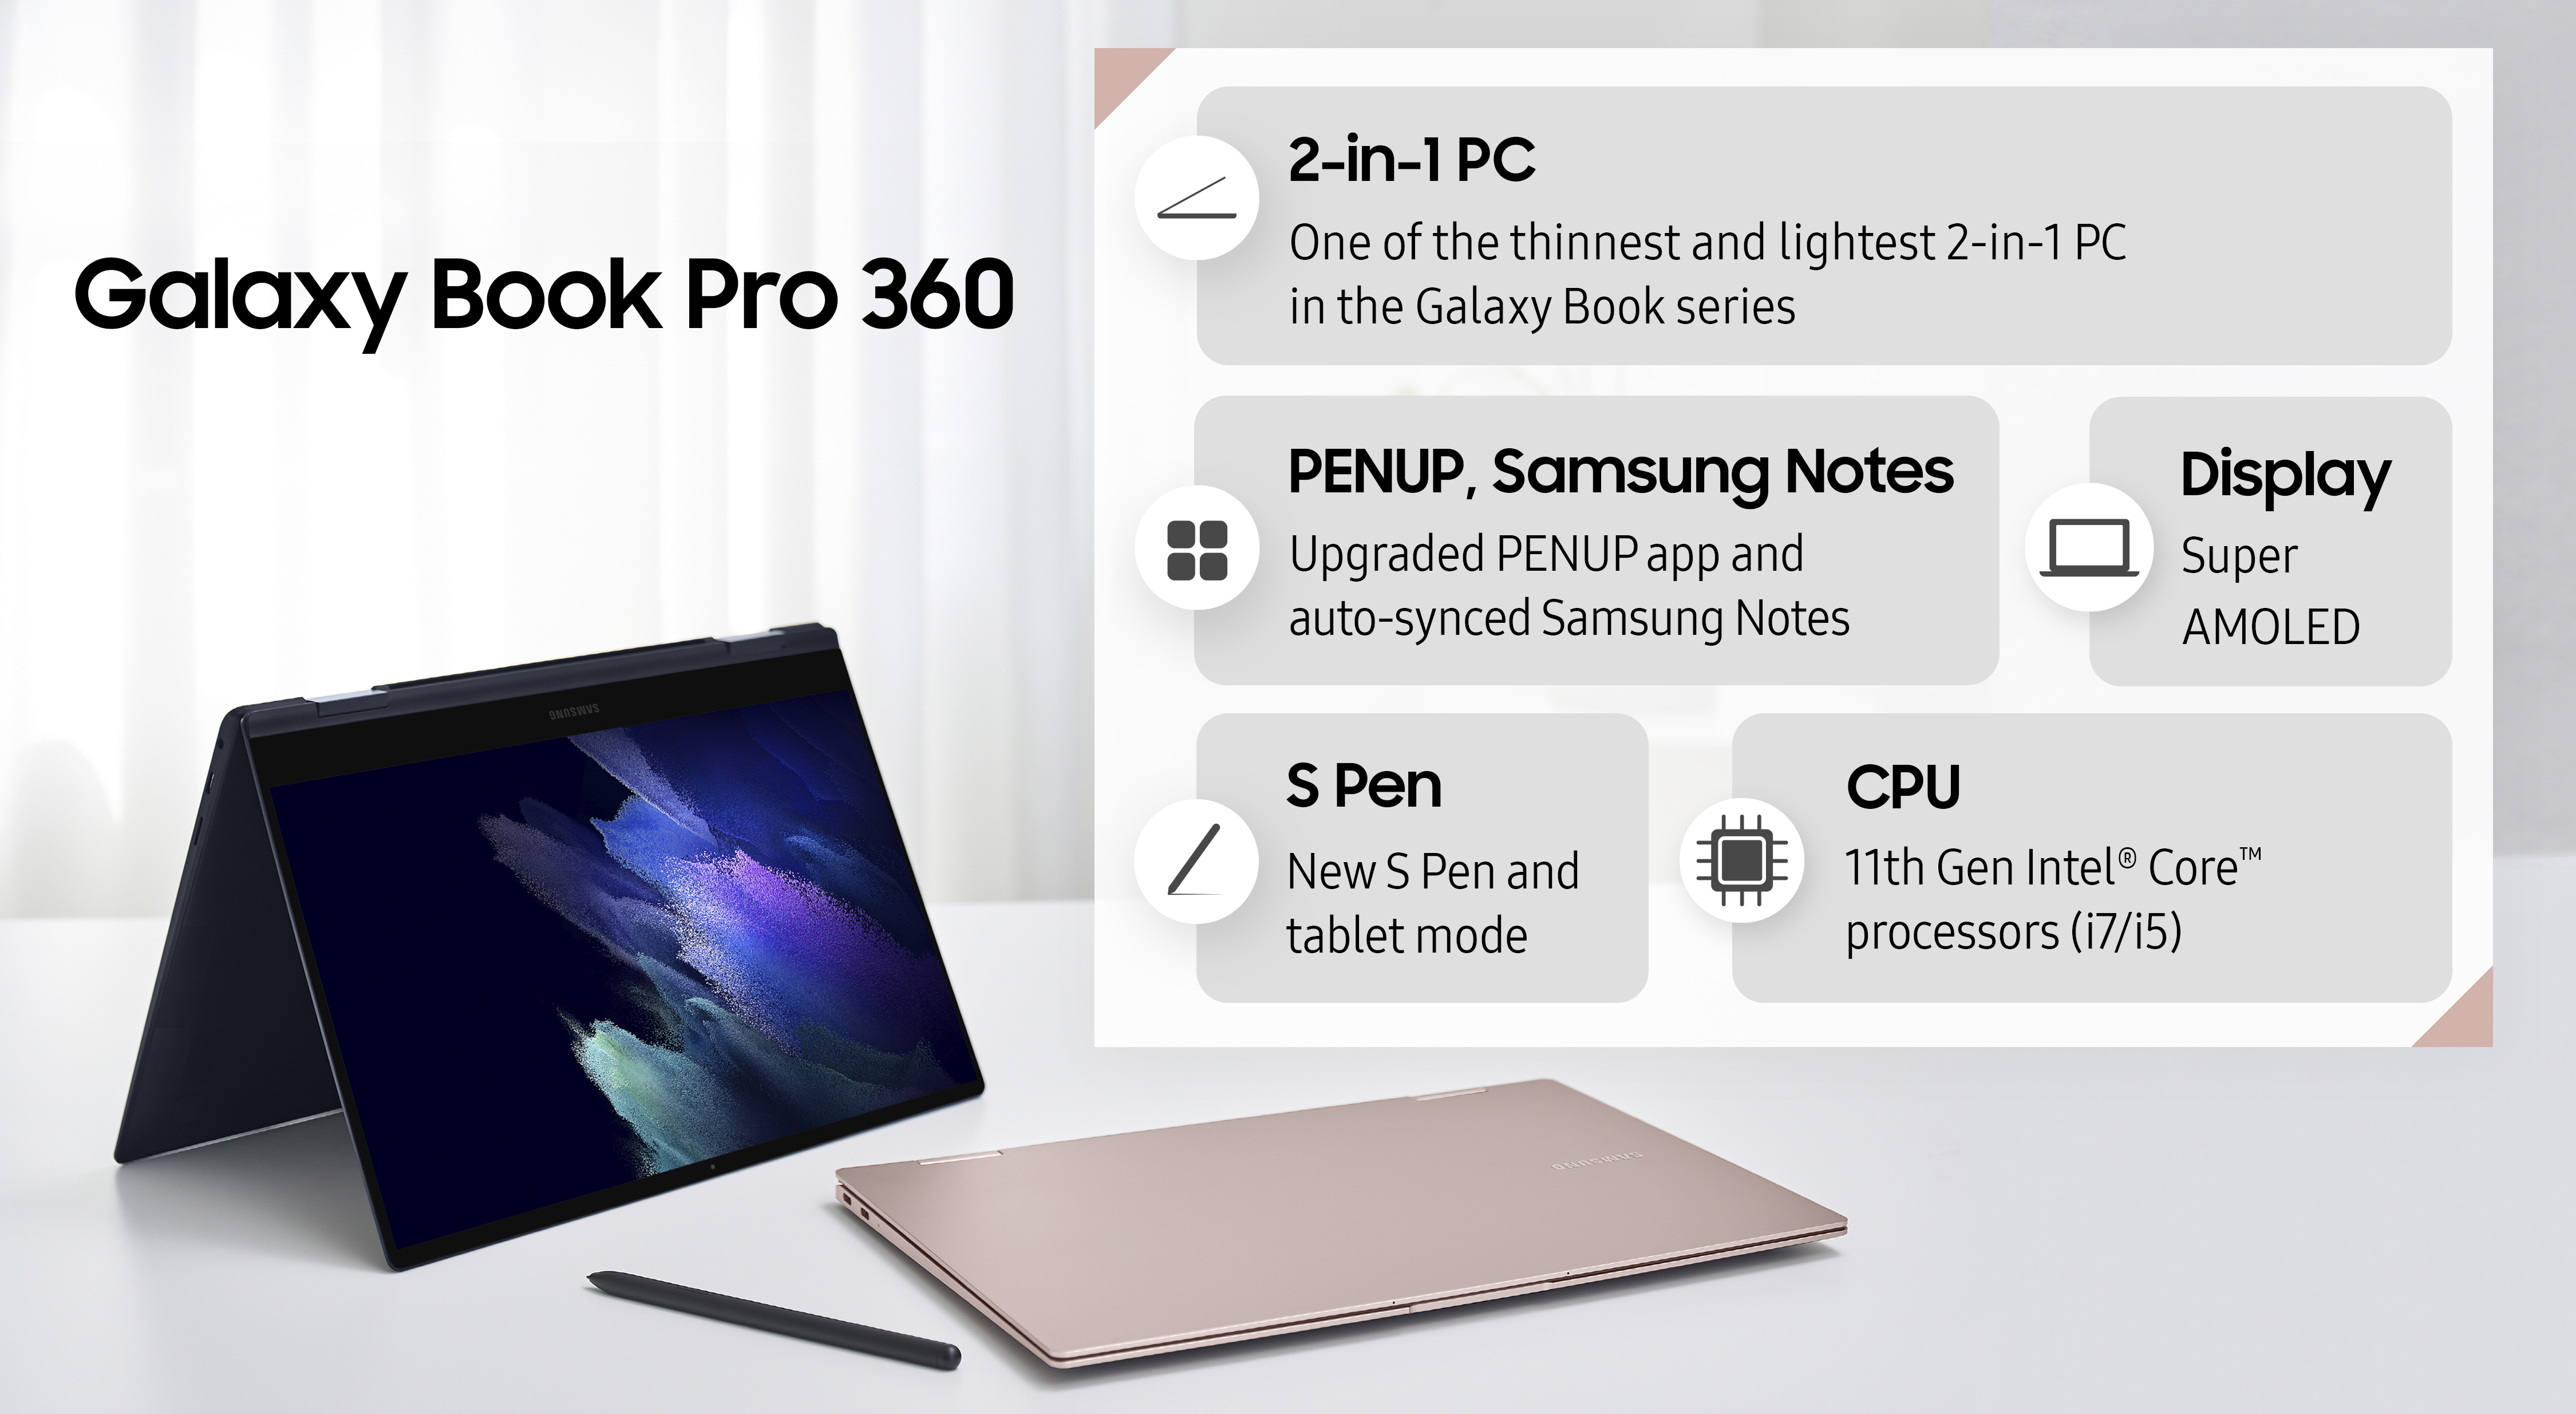 Galaxy Book Pro 360 infographic with key specs